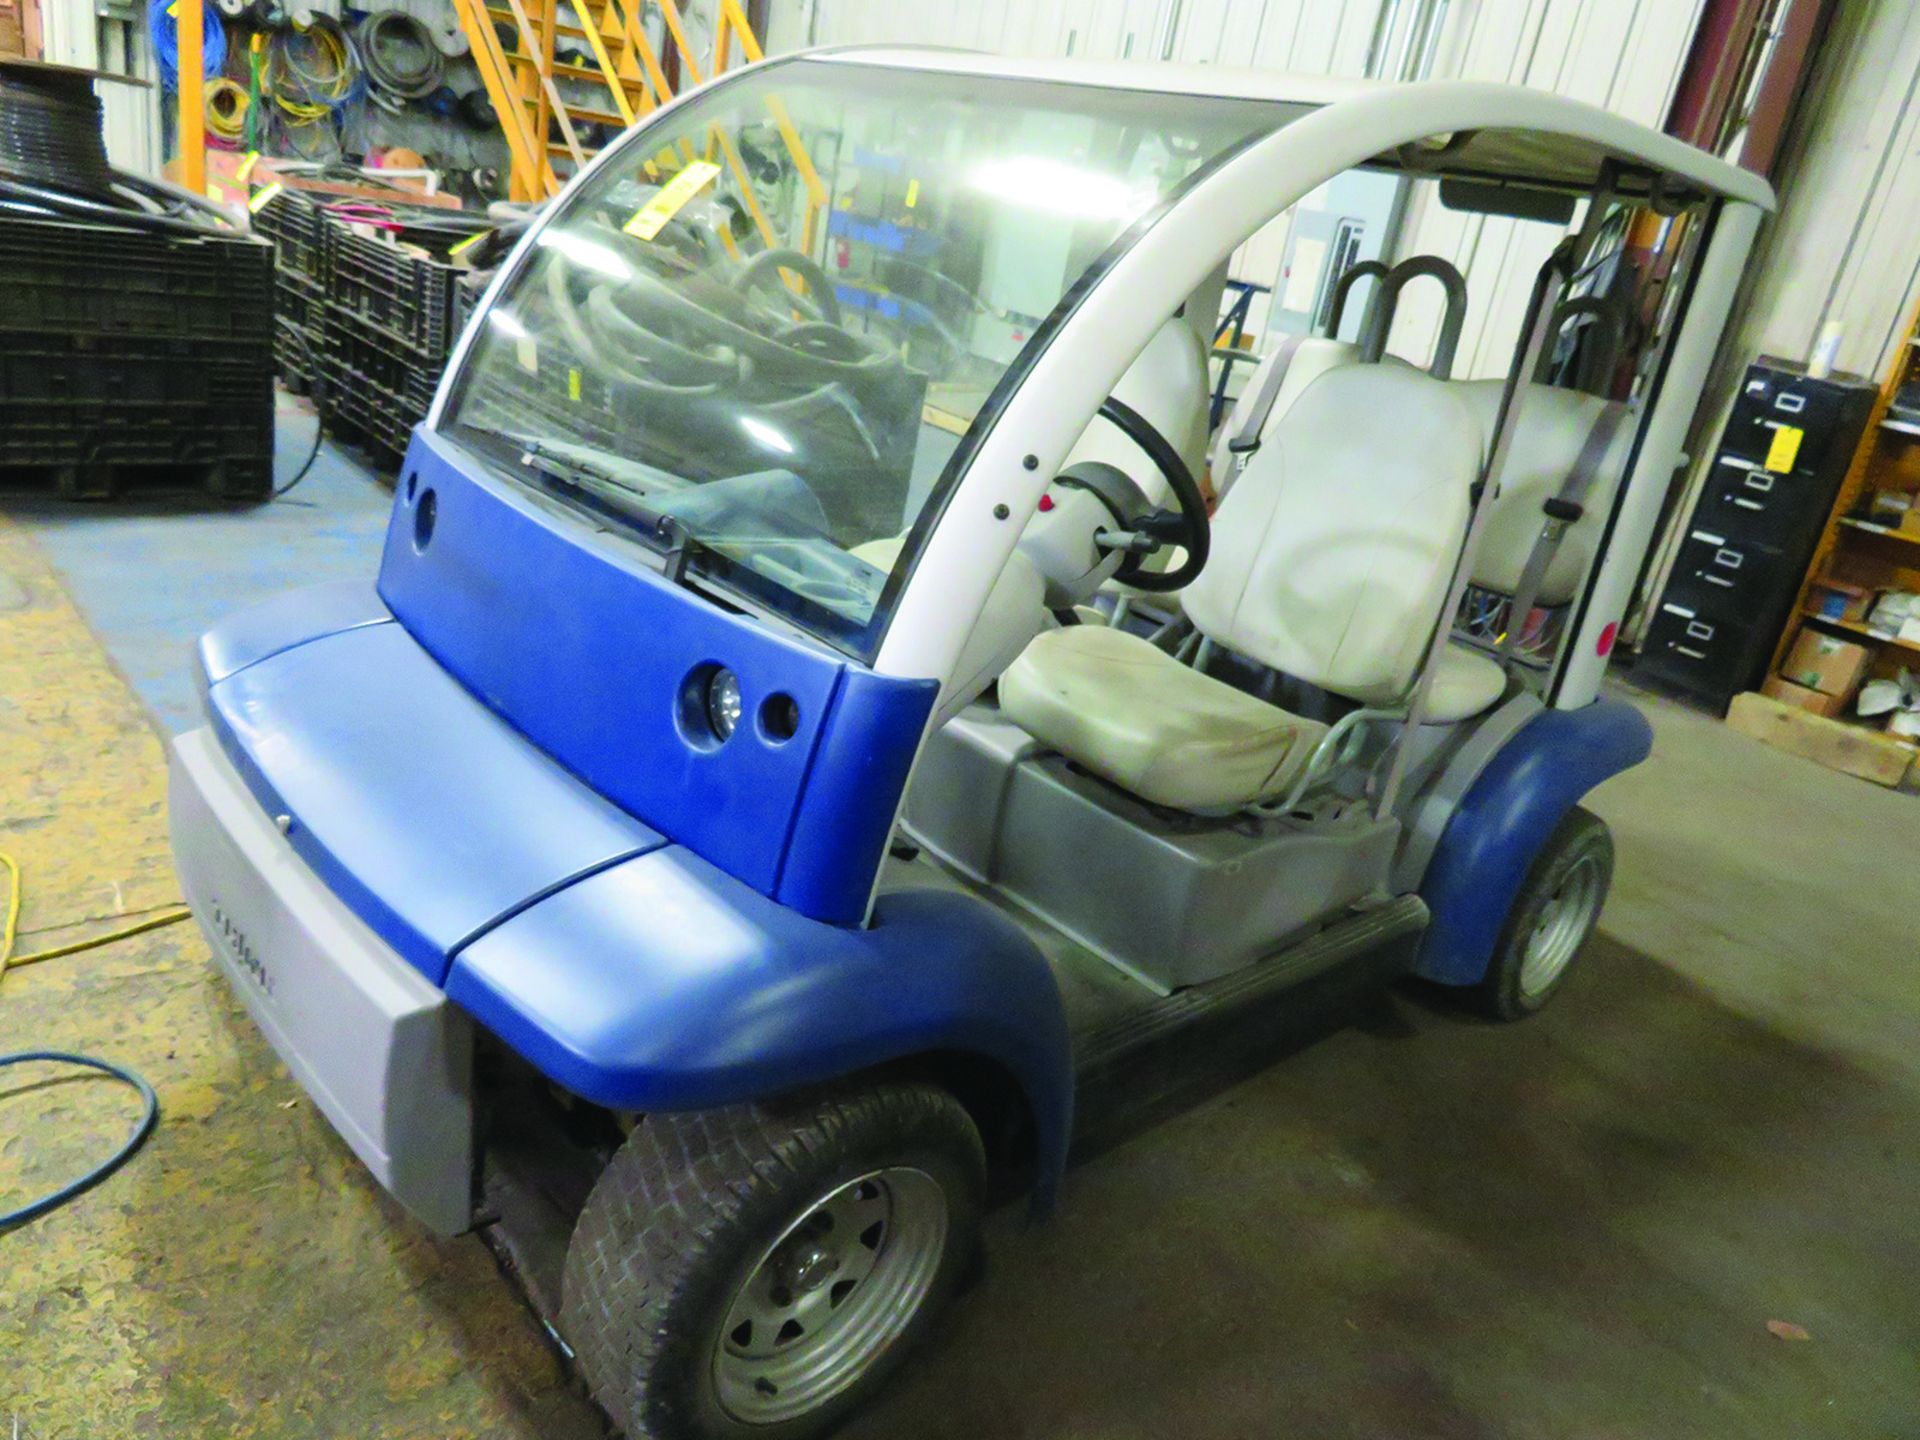 2002 FORD STREET LEGAL 4-SEATER GOLF CART, VIN 1FABP225820104172, POWERED BY A 72 VOLT AIR-COOLED - Image 2 of 2